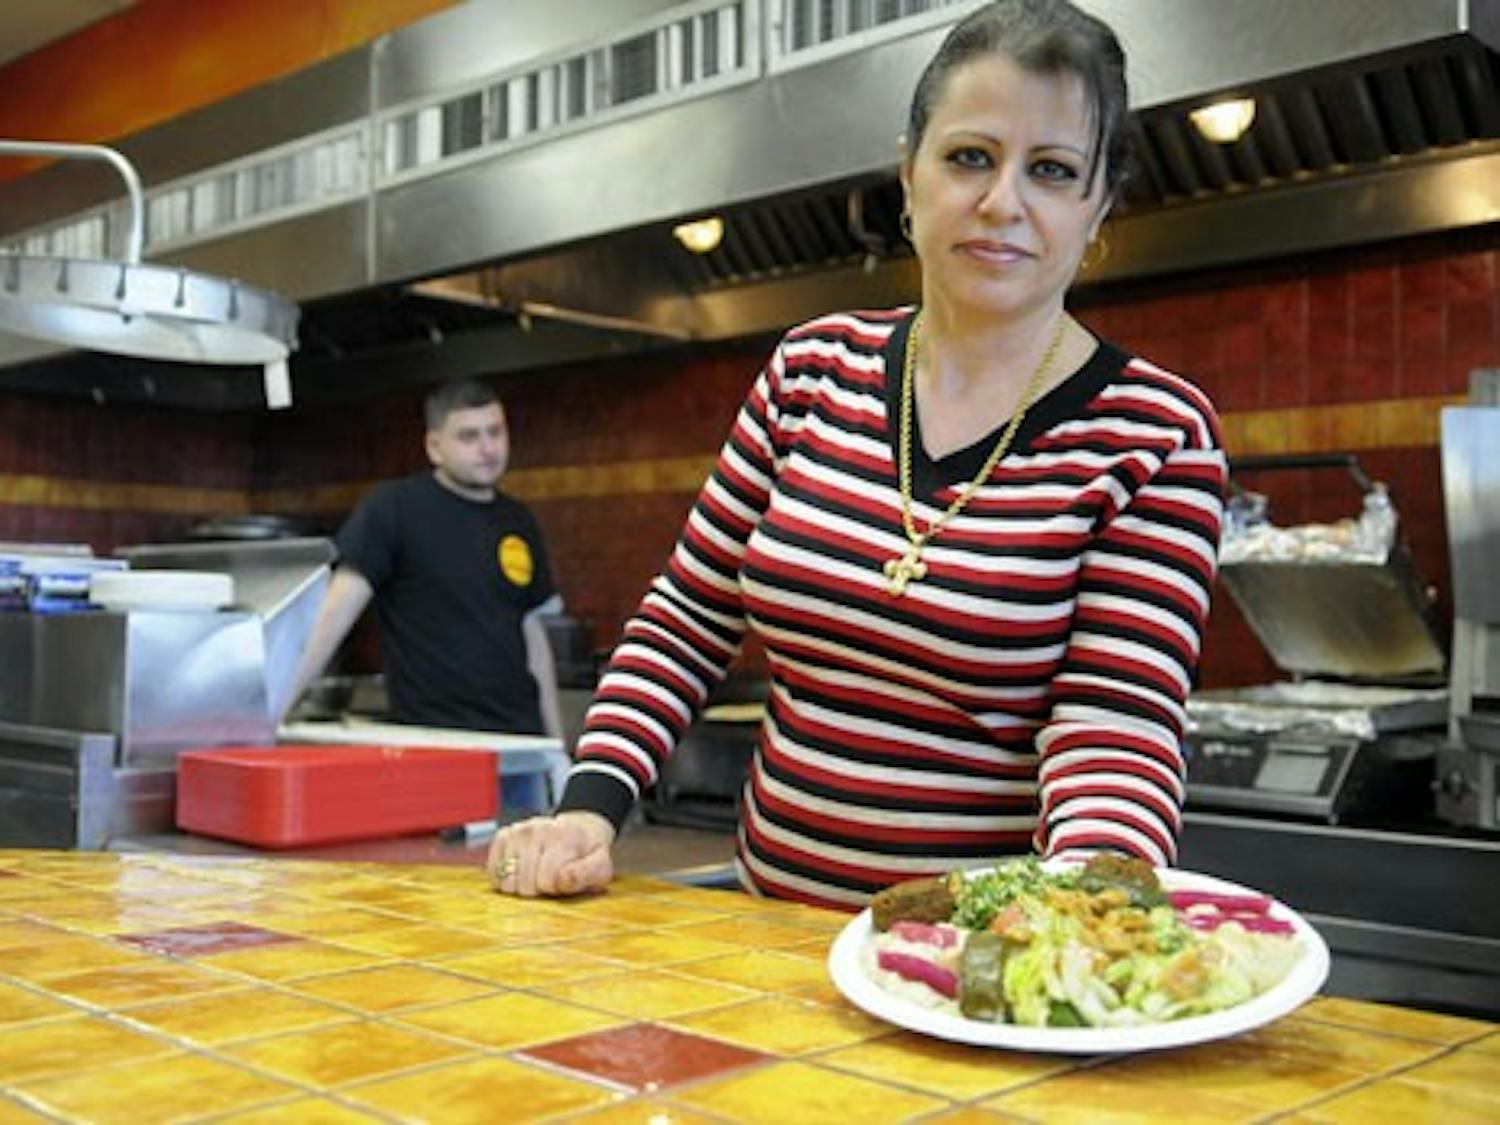 Helen Nesheiwat shows a dish prepared at Sahara Middle Eastern Eatery. Nesheiwat moved to the U.S. from Lebanon when she was 12. She co-owns Sahara and Times Square Deli Mart with her husband, Monir, and Haytham Khalil.